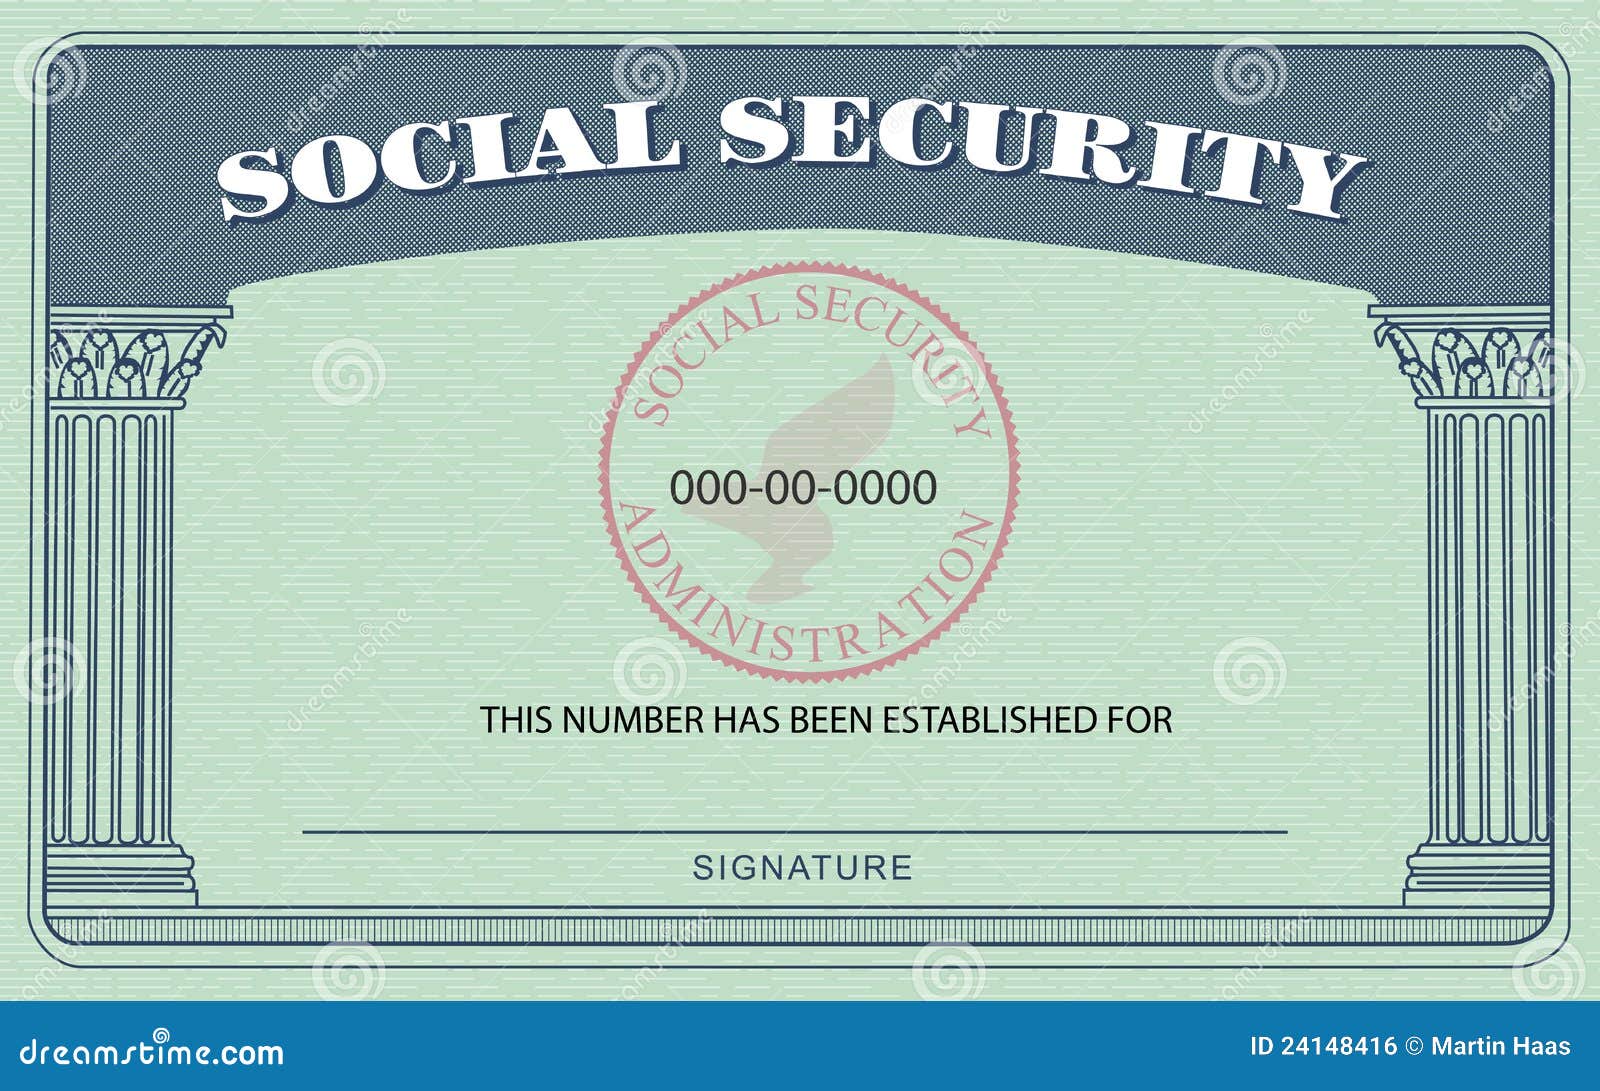 Your social security number and card